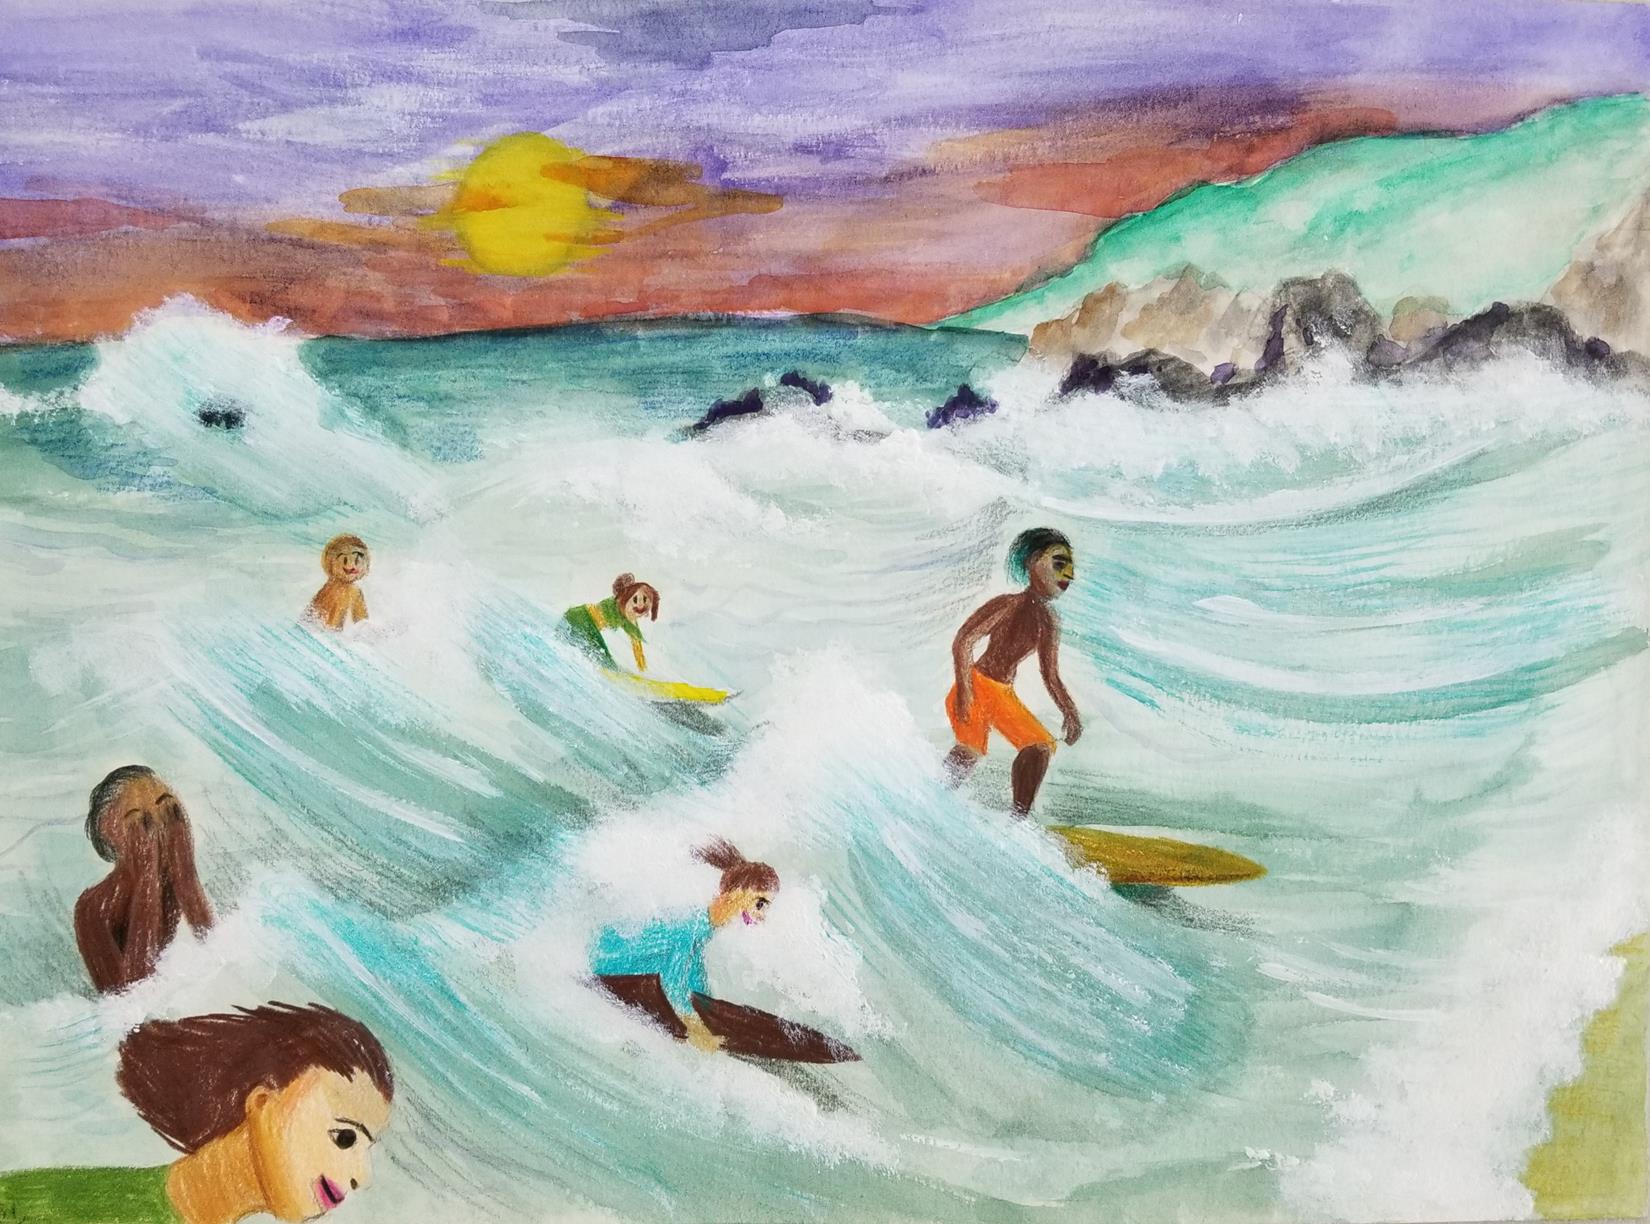 six kids surfing and playing in the waves, a sunset in the background